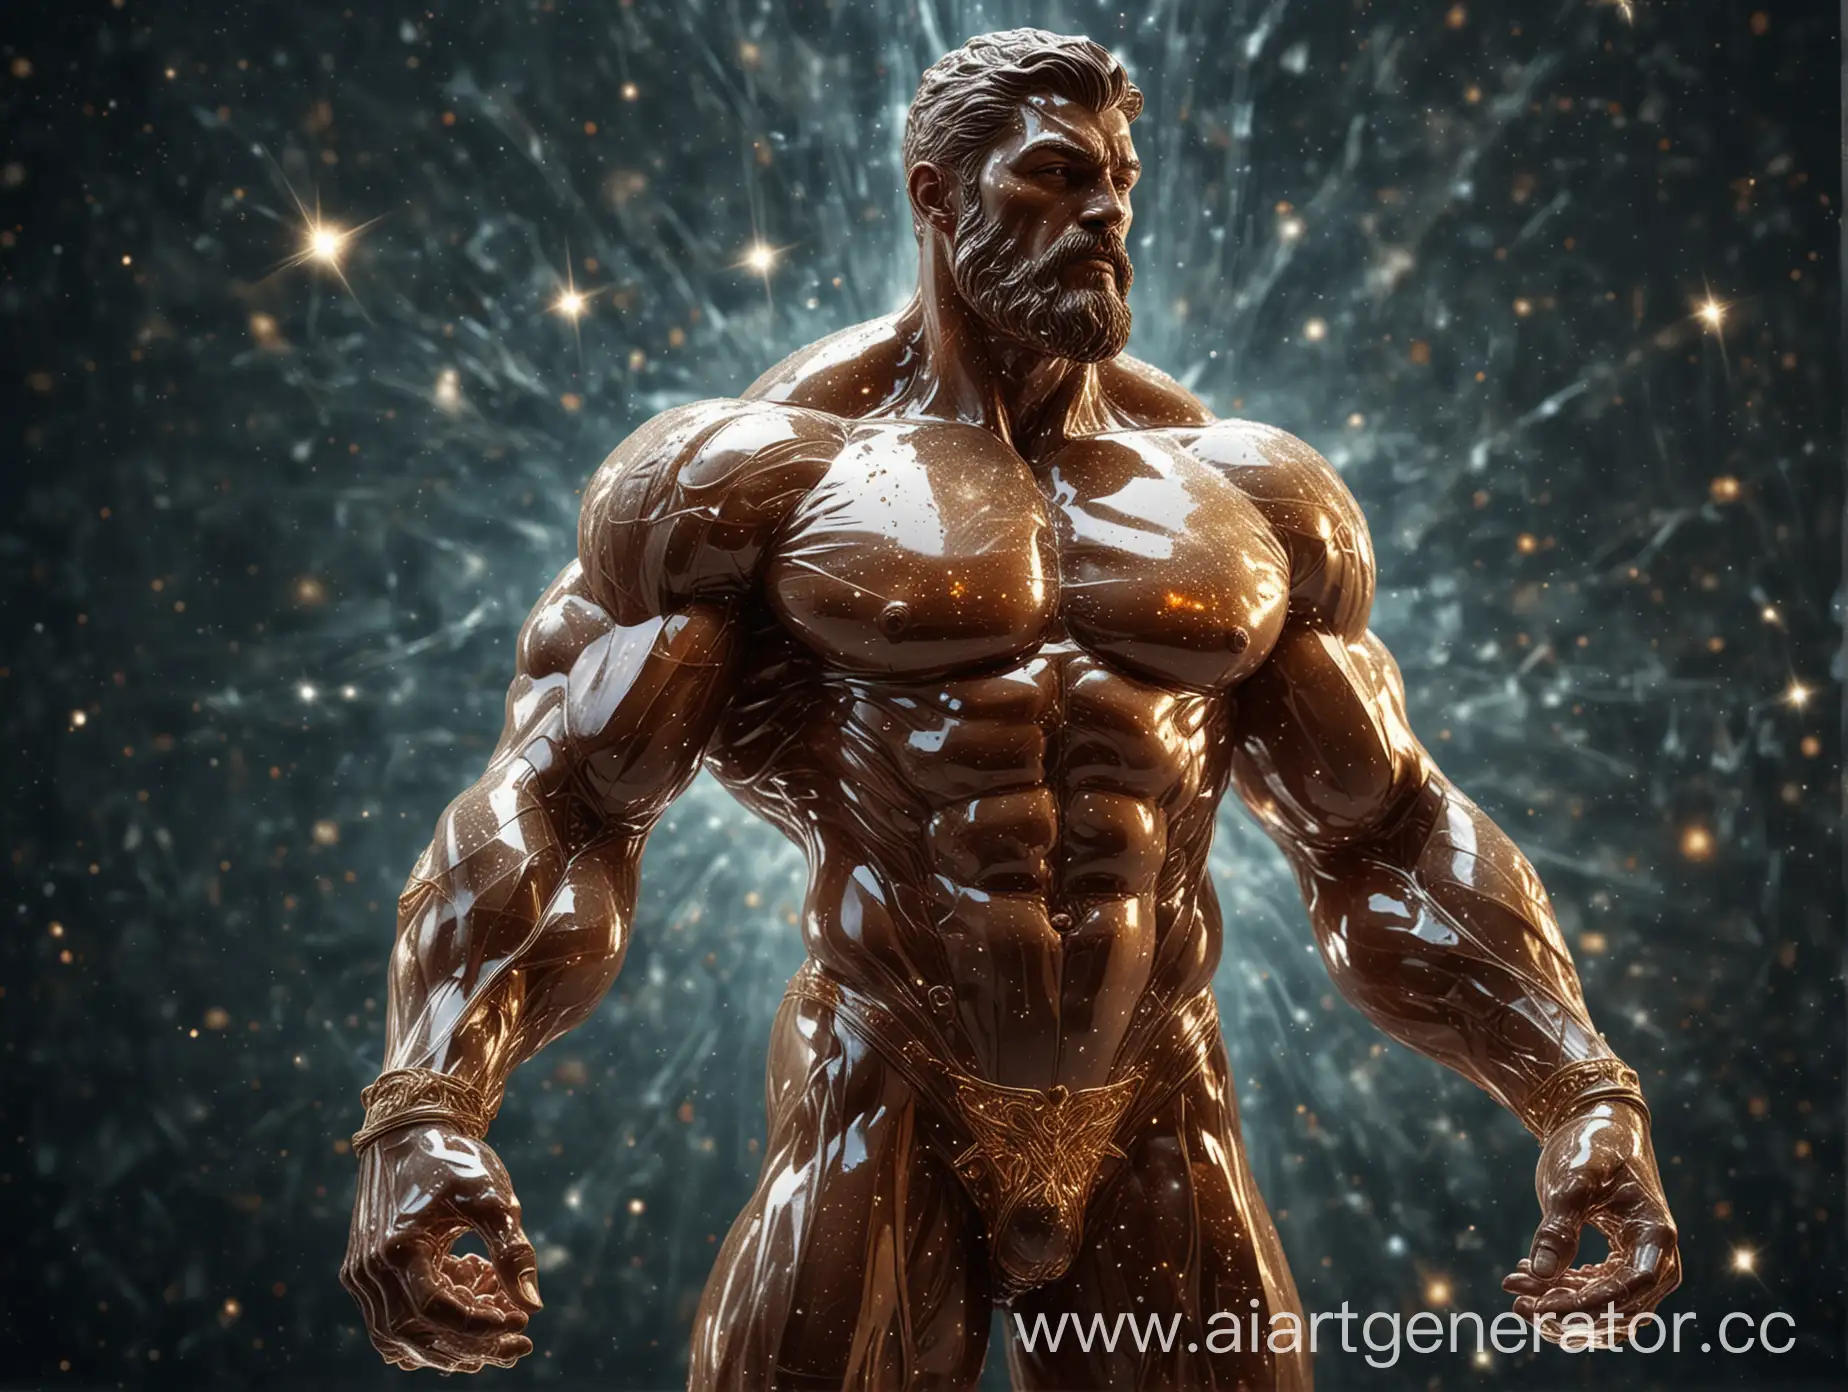 Translucent-Crystal-Bodybuilder-with-Golden-Nervous-System-in-Cosmic-Space